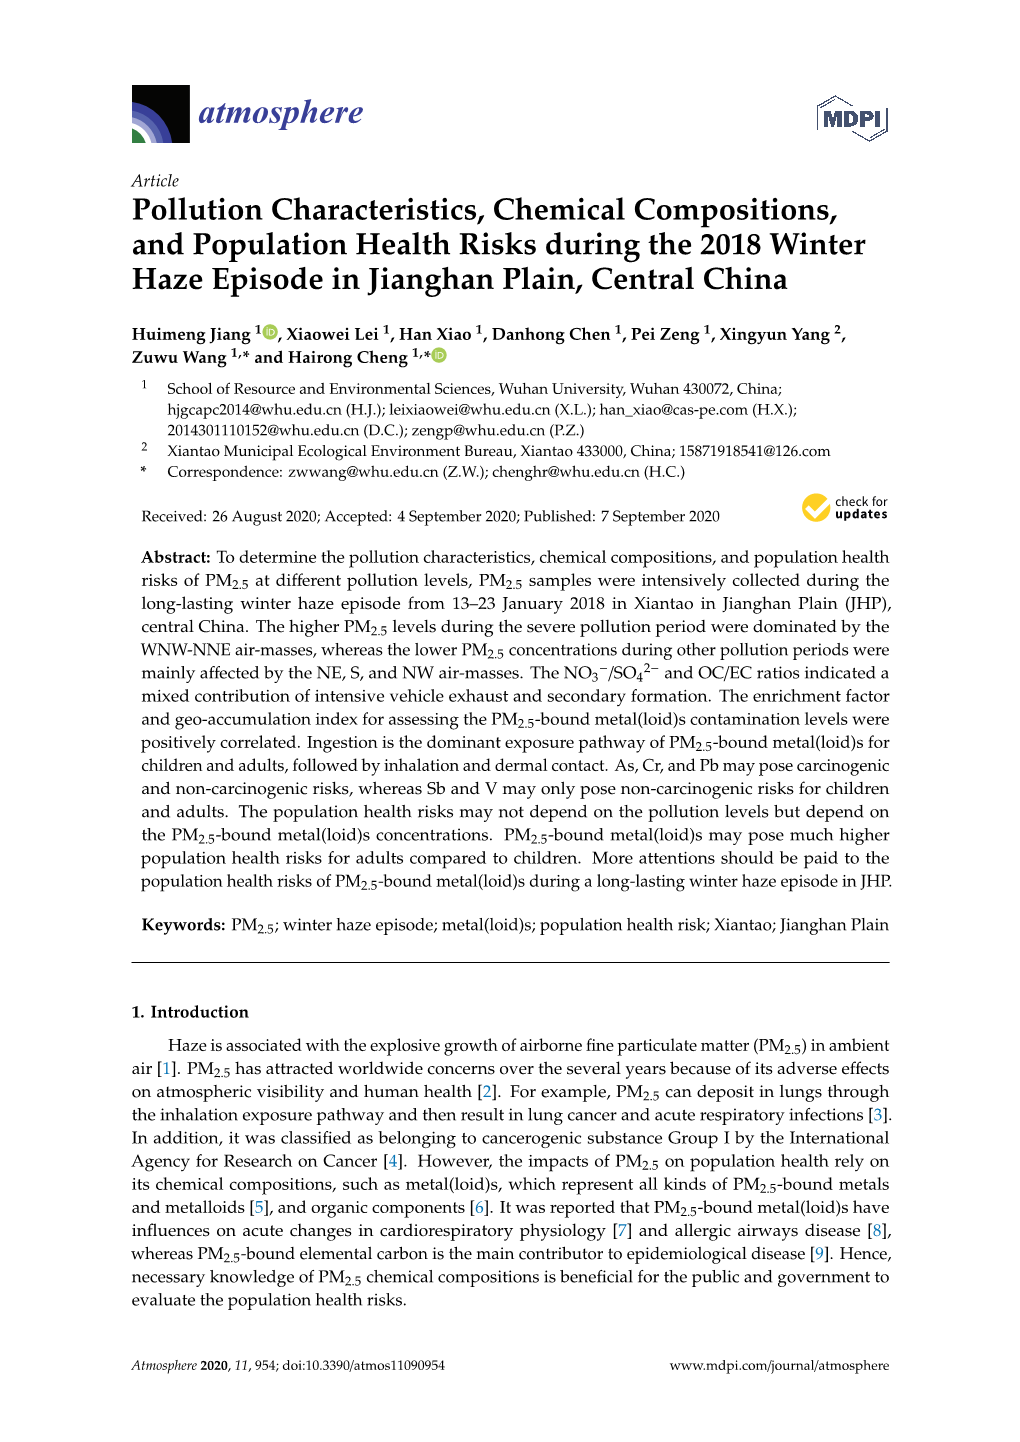 Pollution Characteristics, Chemical Compositions, and Population Health Risks During the 2018 Winter Haze Episode in Jianghan Plain, Central China